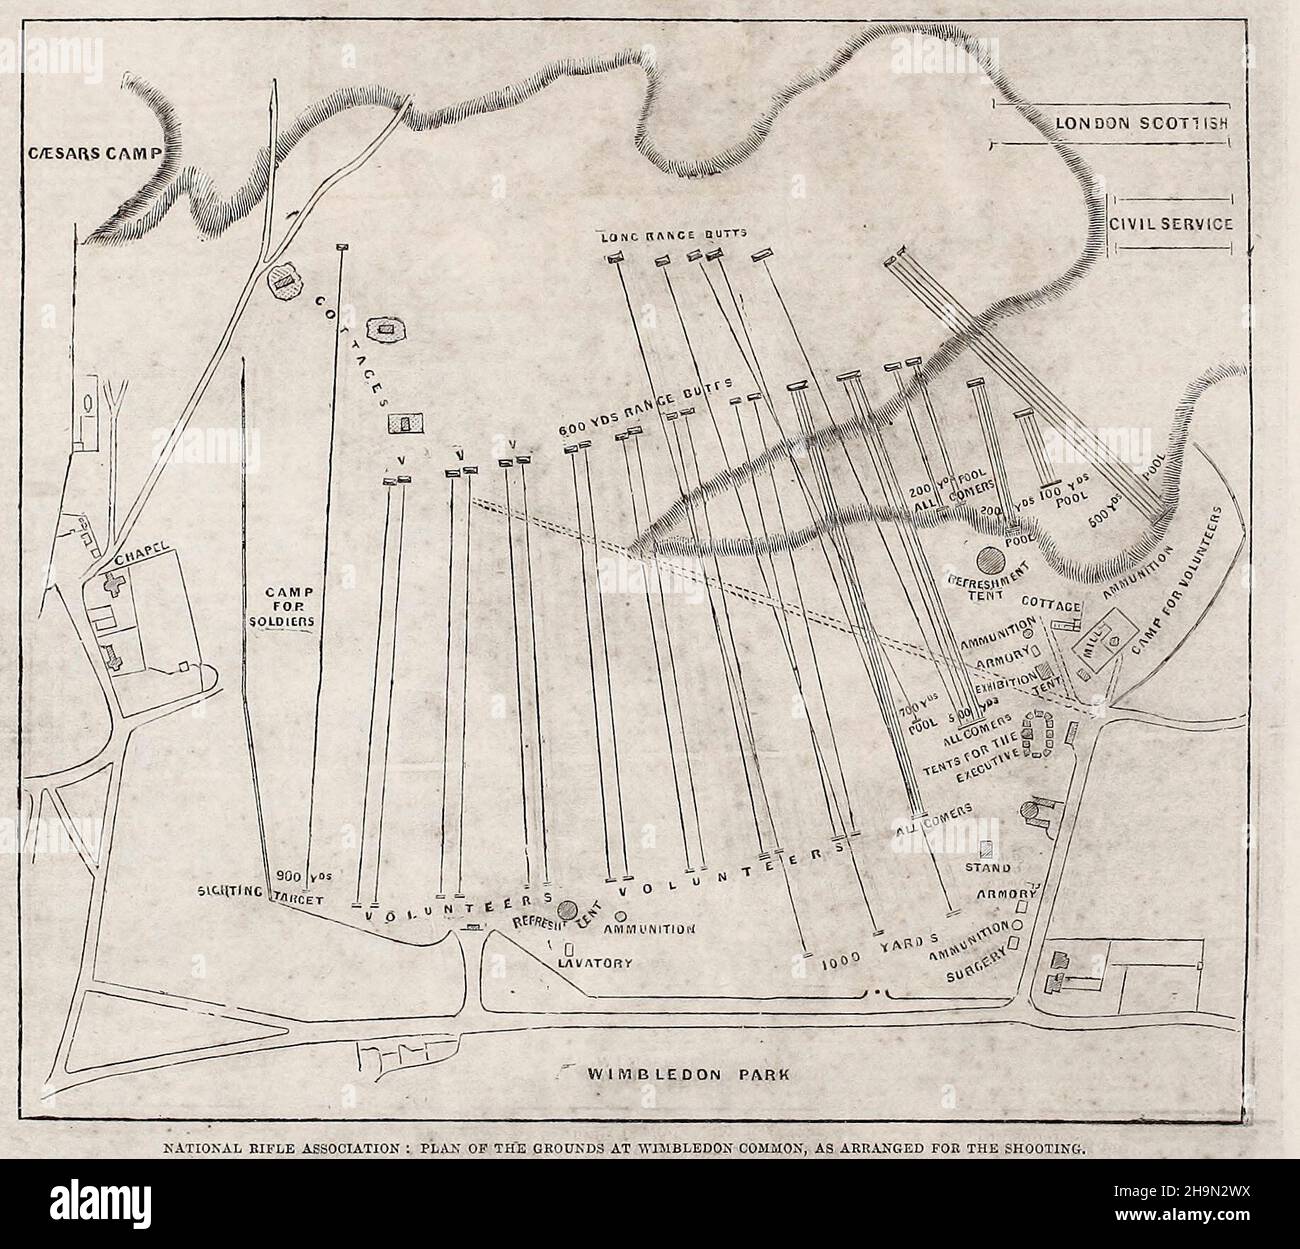 National Rifle Association - Plan of the Grounds at Wimbledon Common, as arranged for the shooting, 1861 Stock Photo